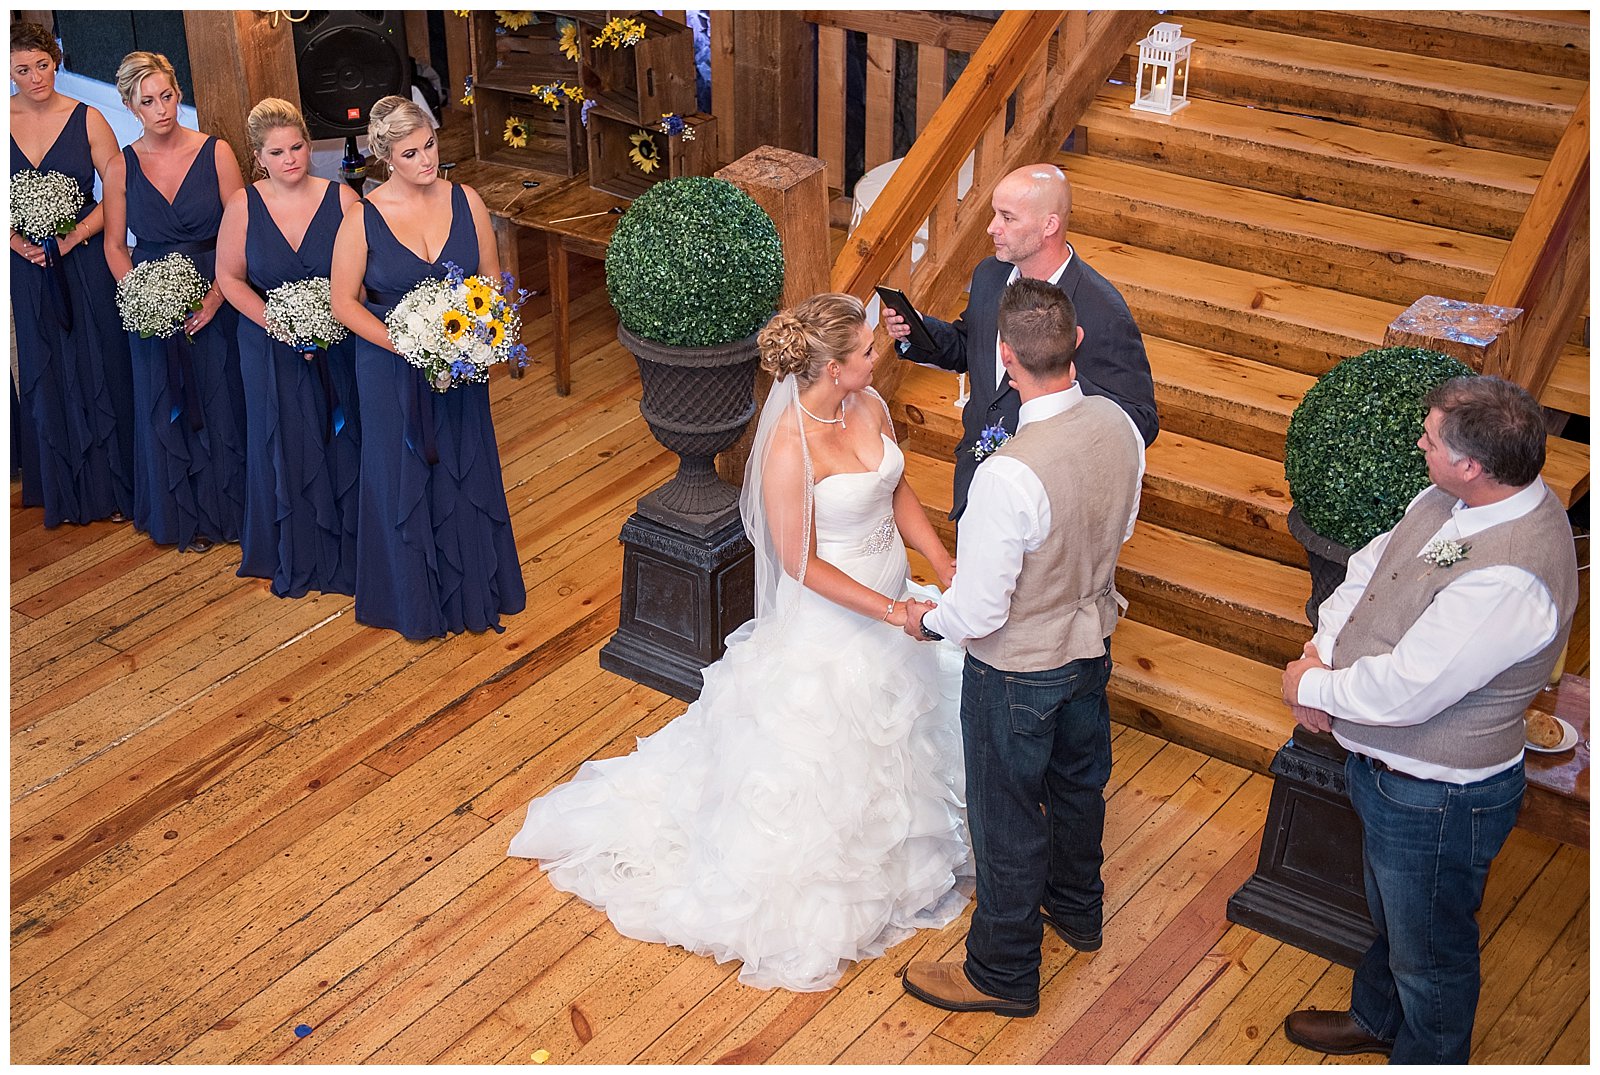 A bride and groom in the middle of their wedding ceremony in the beautiful barn of the red lion inn